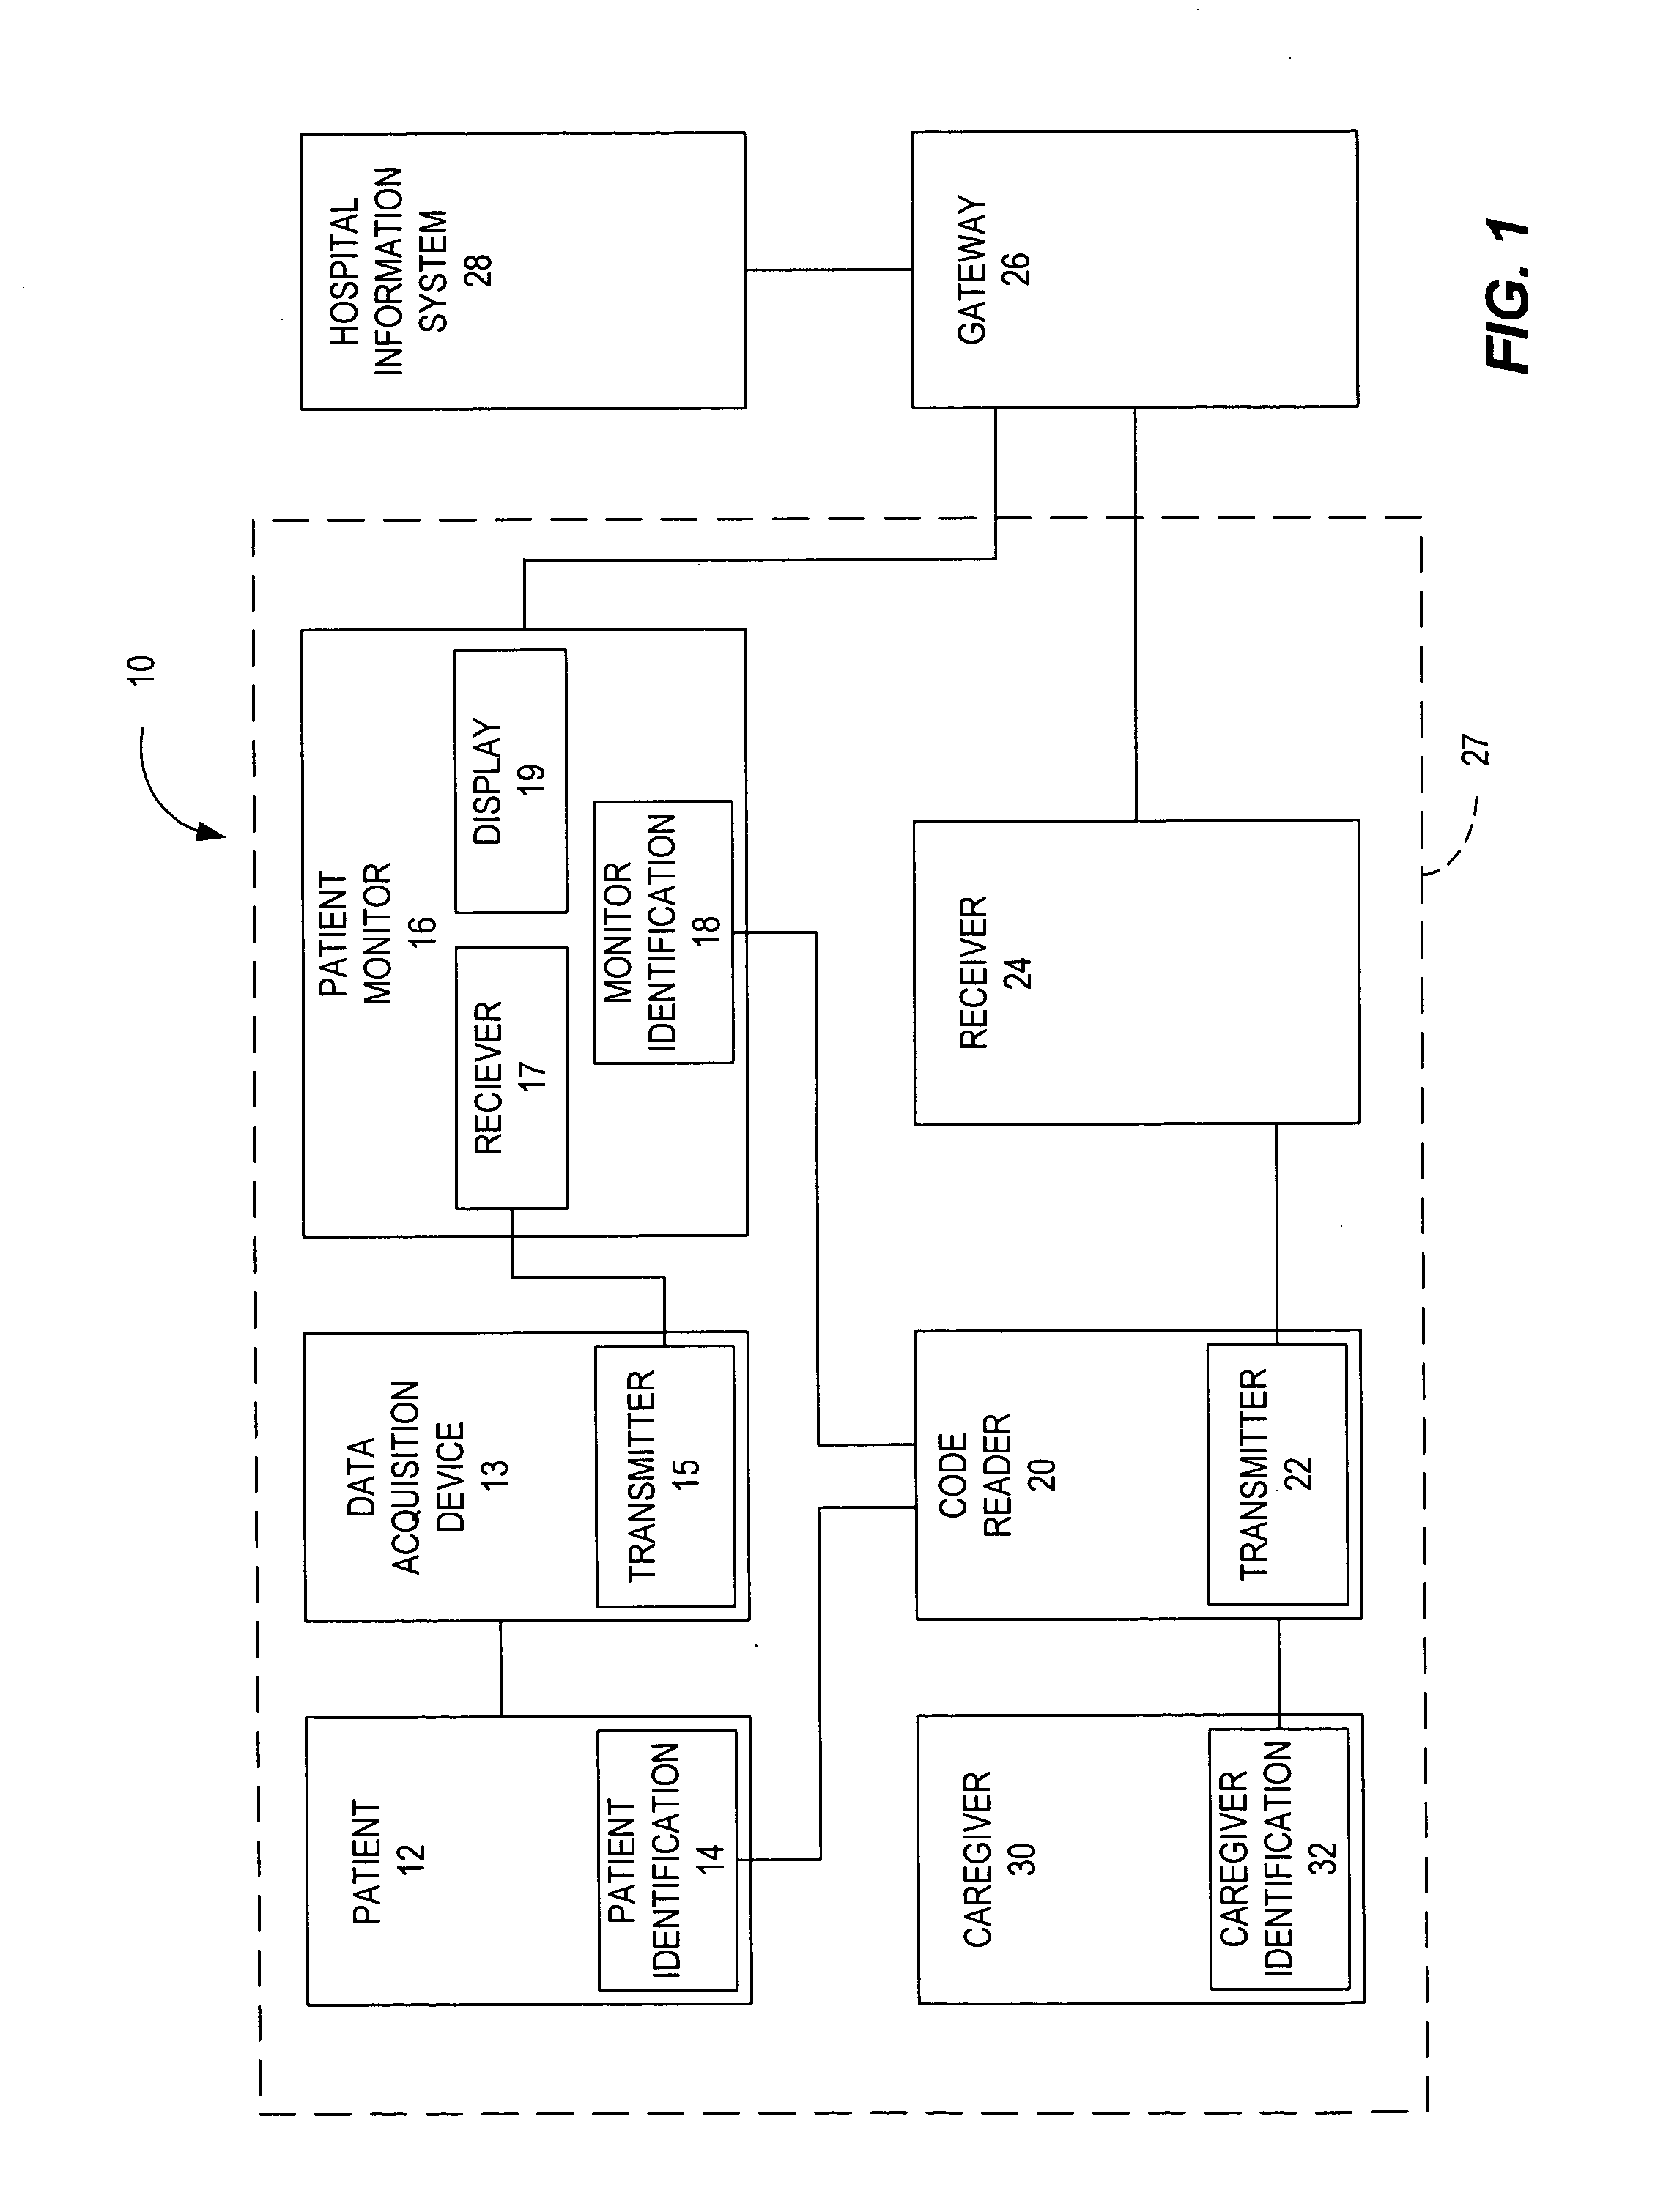 System and method for linking patient monitoring data to patient identification